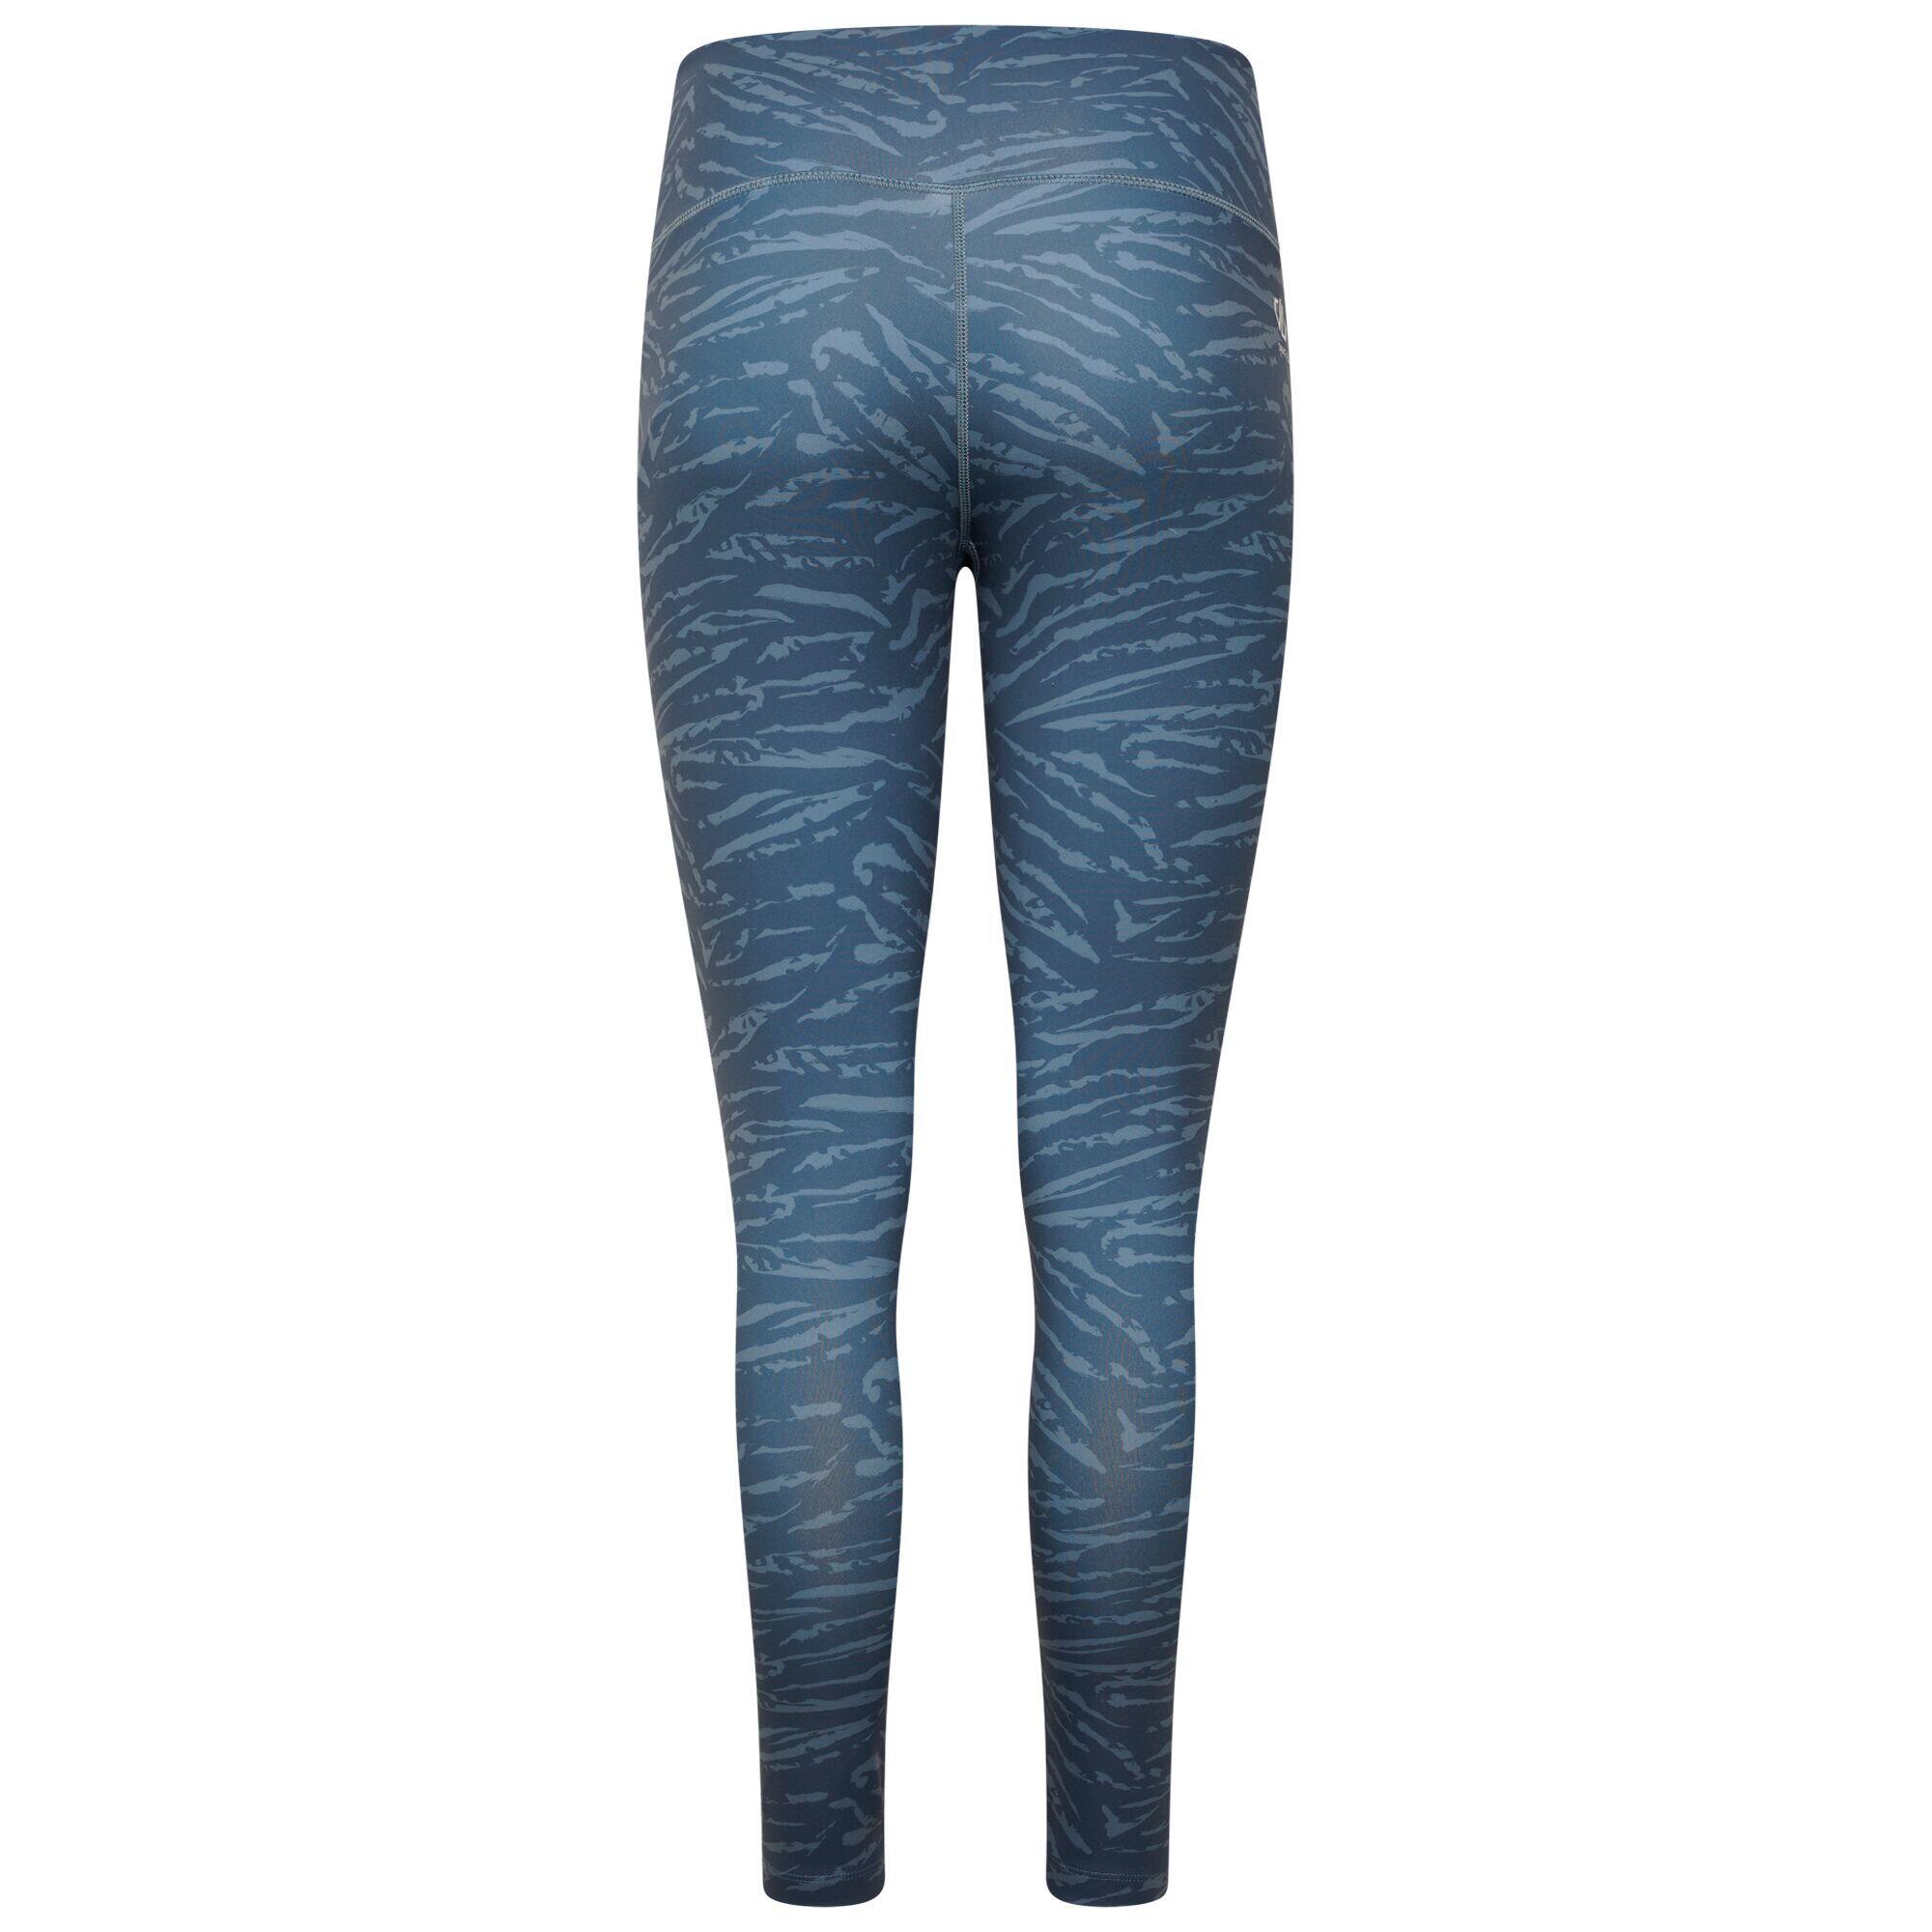 Womens/Ladies Influential Tiger Print Recycled Leggings (Orion Grey) 2/5